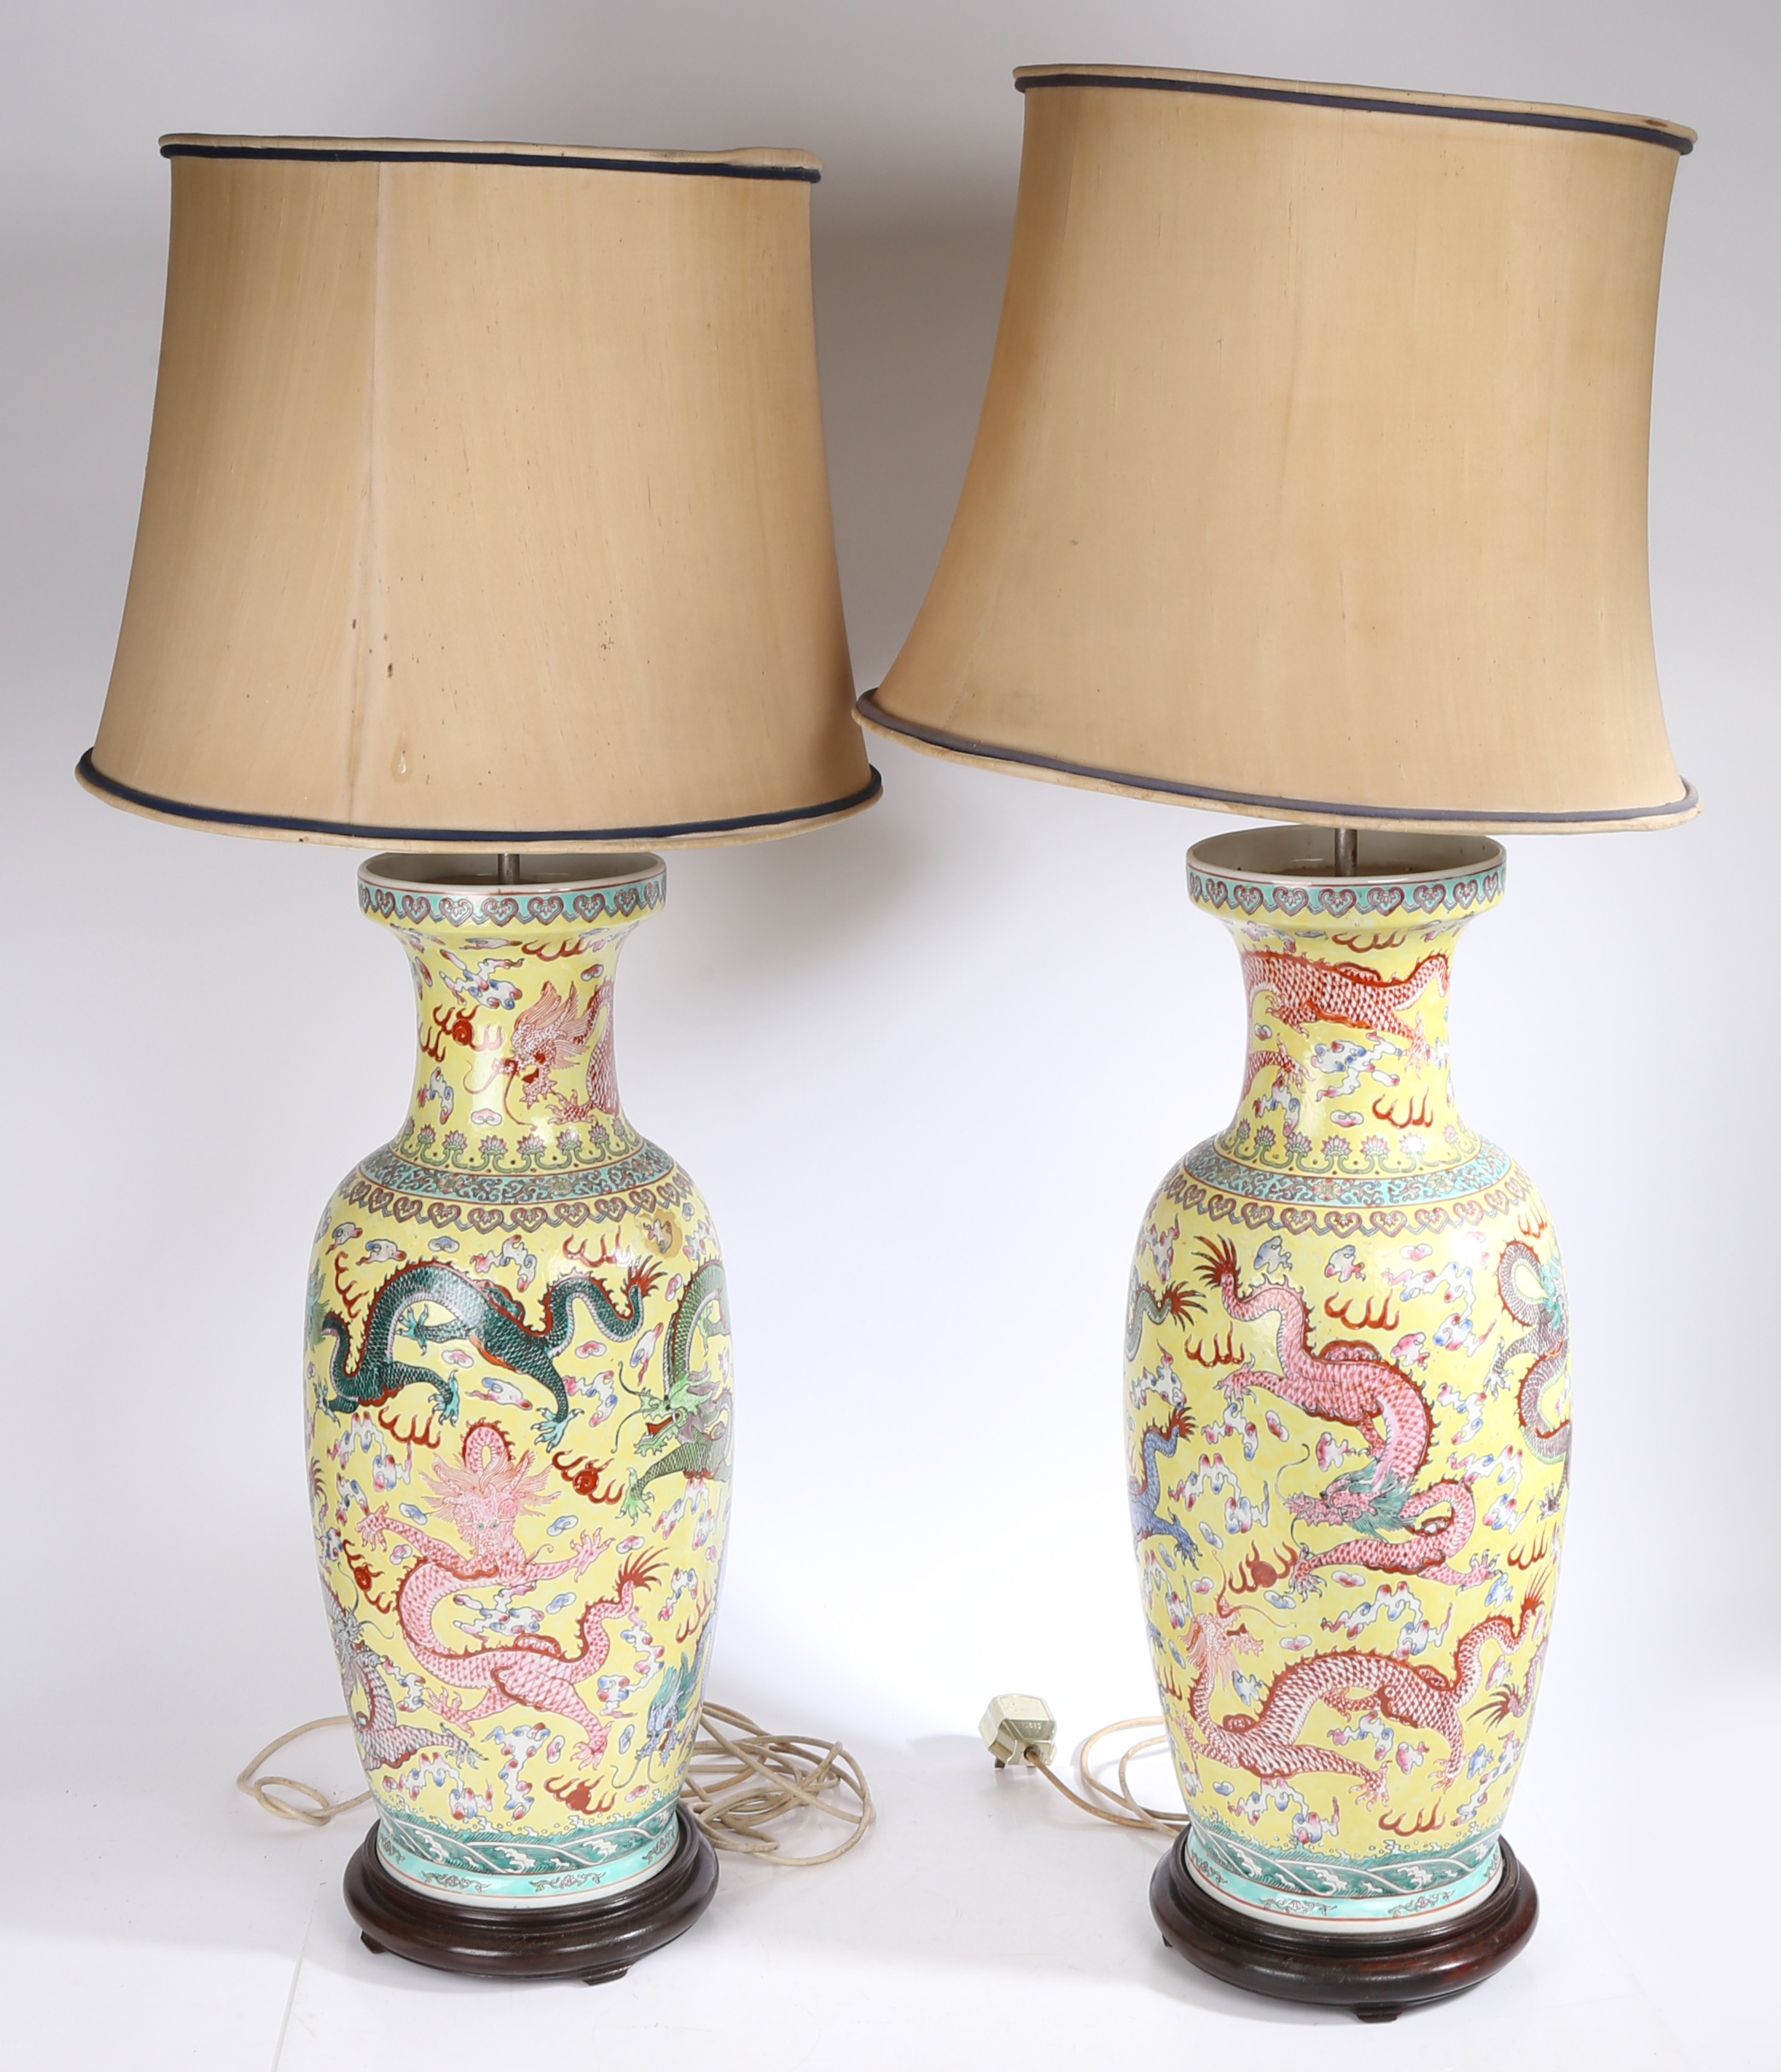 A Large pair of Chinese vases (converted into lamps), 20th century, having a yellow ground decorated